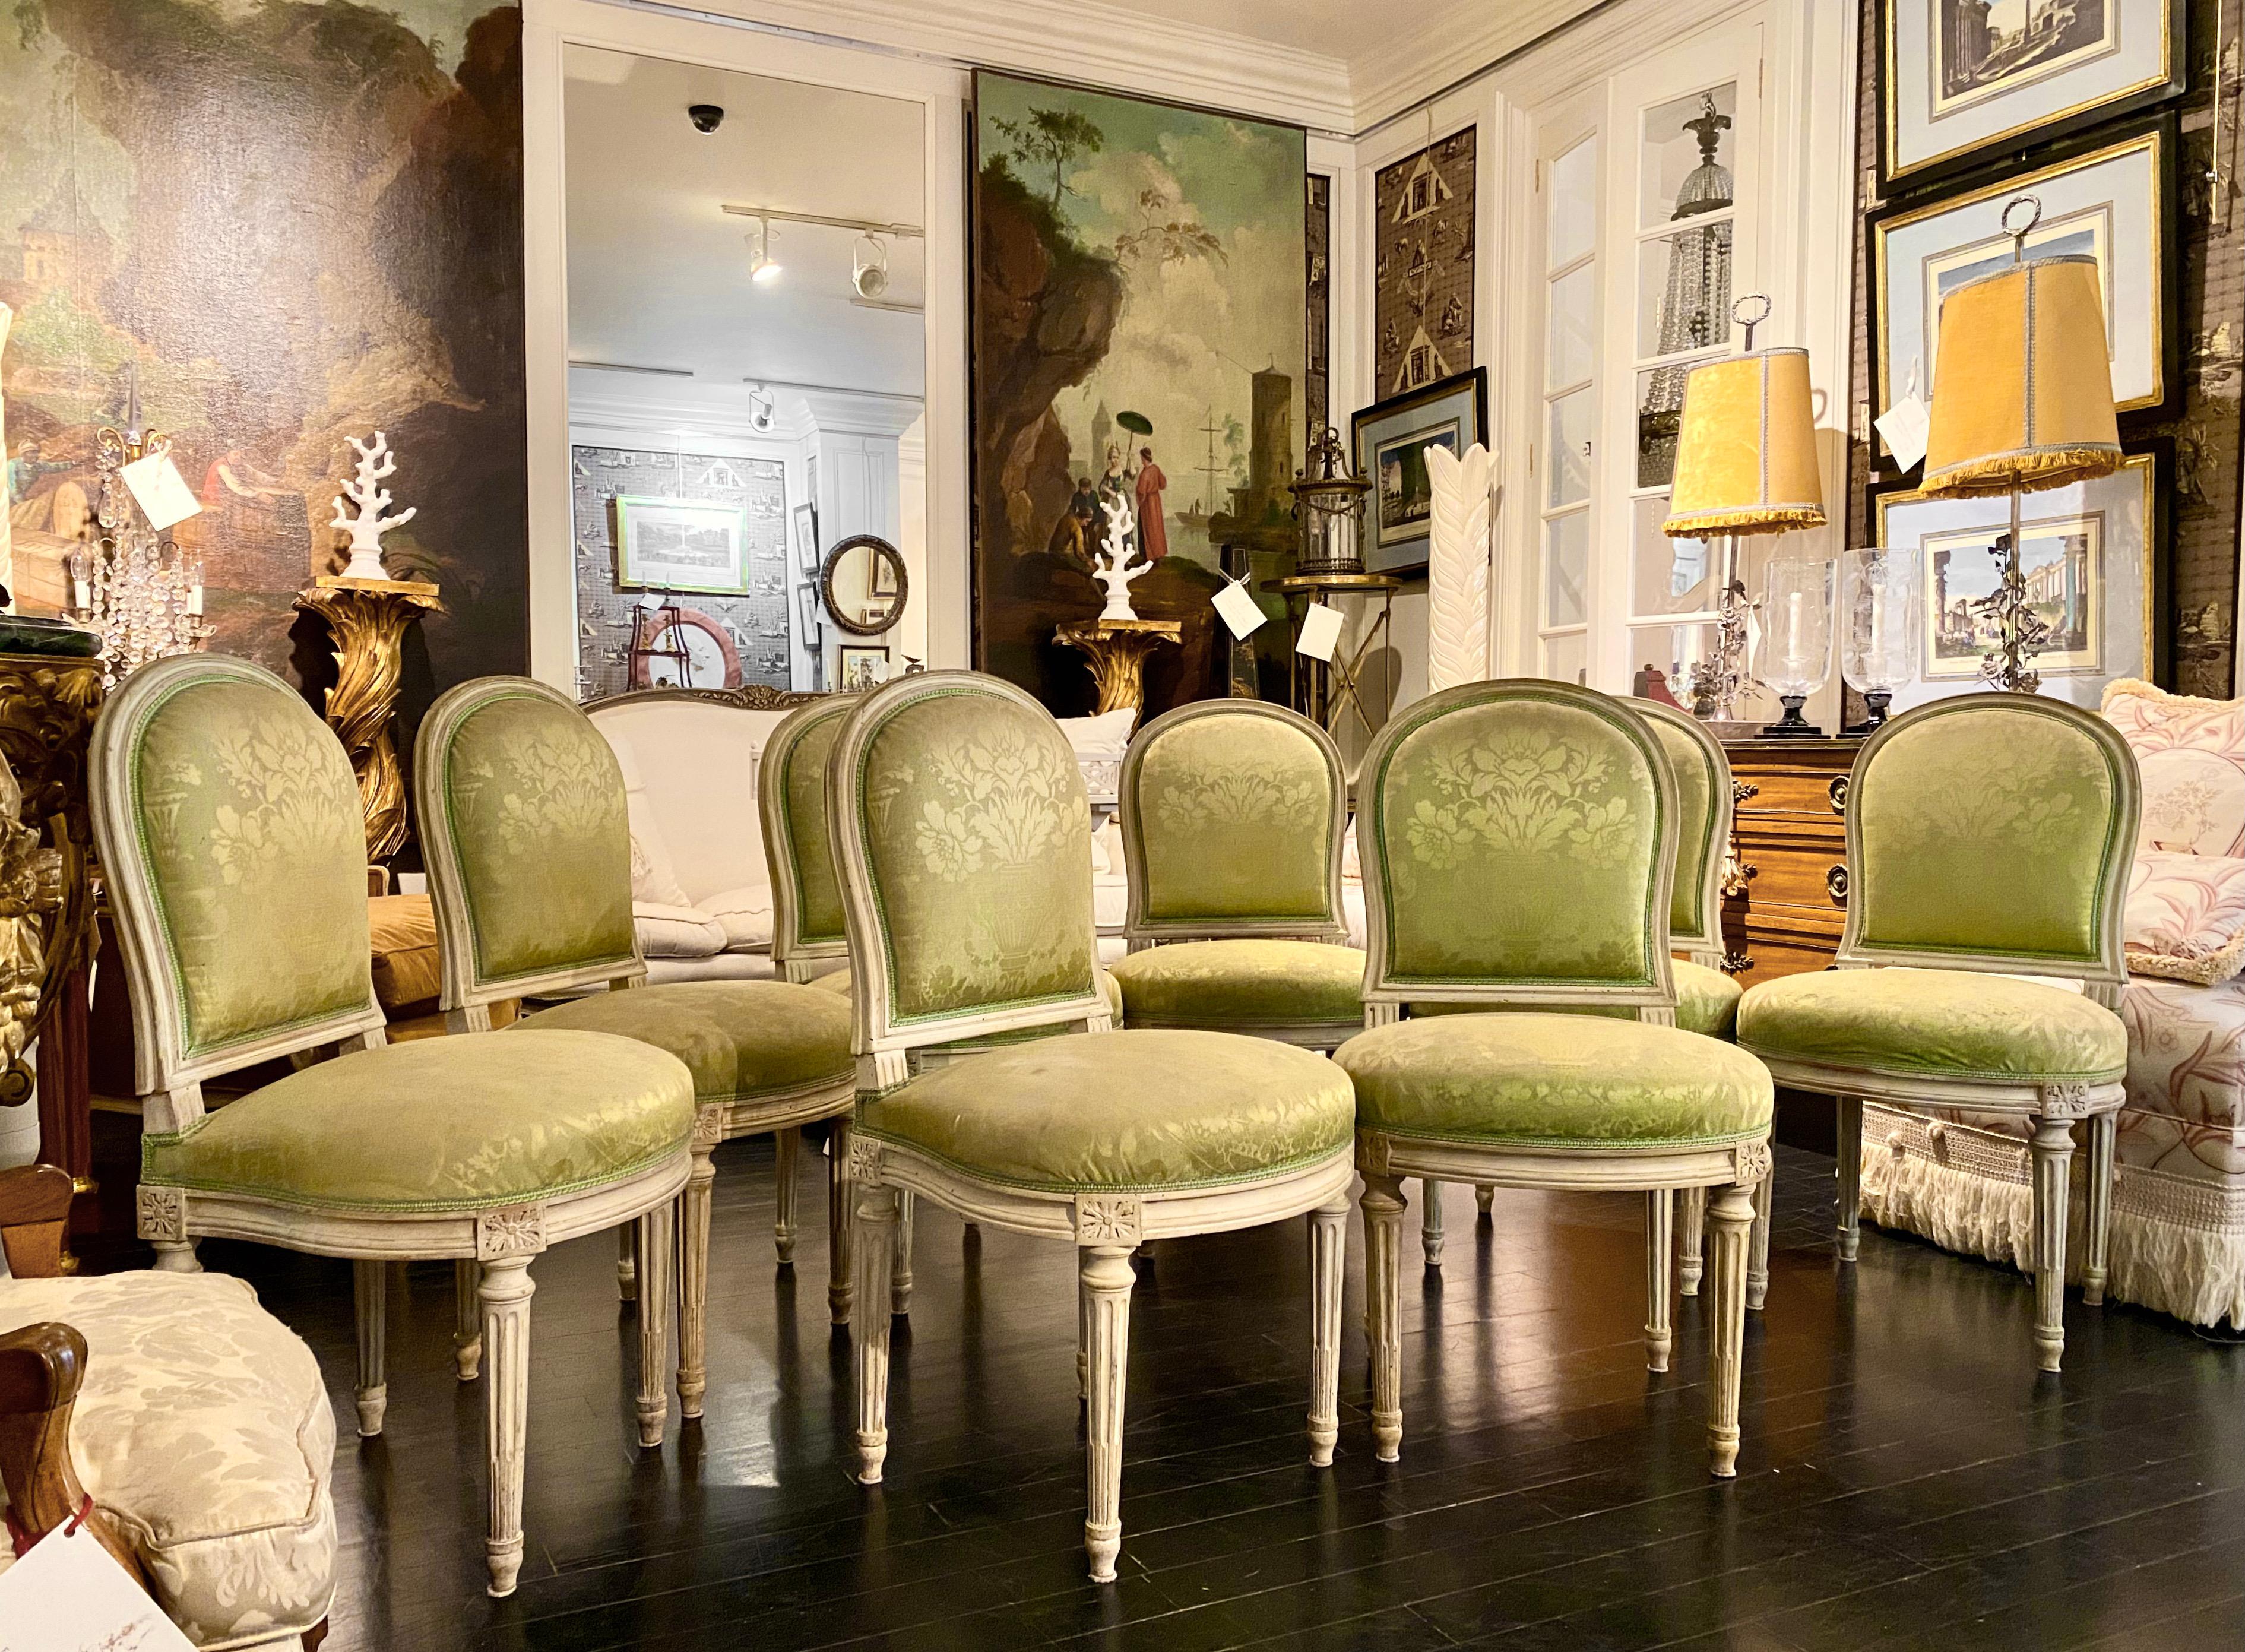 Set of 8 Louis XVI style French chairs.
Painted and patinated wood, upholstered in pale green damask, beautiful model.